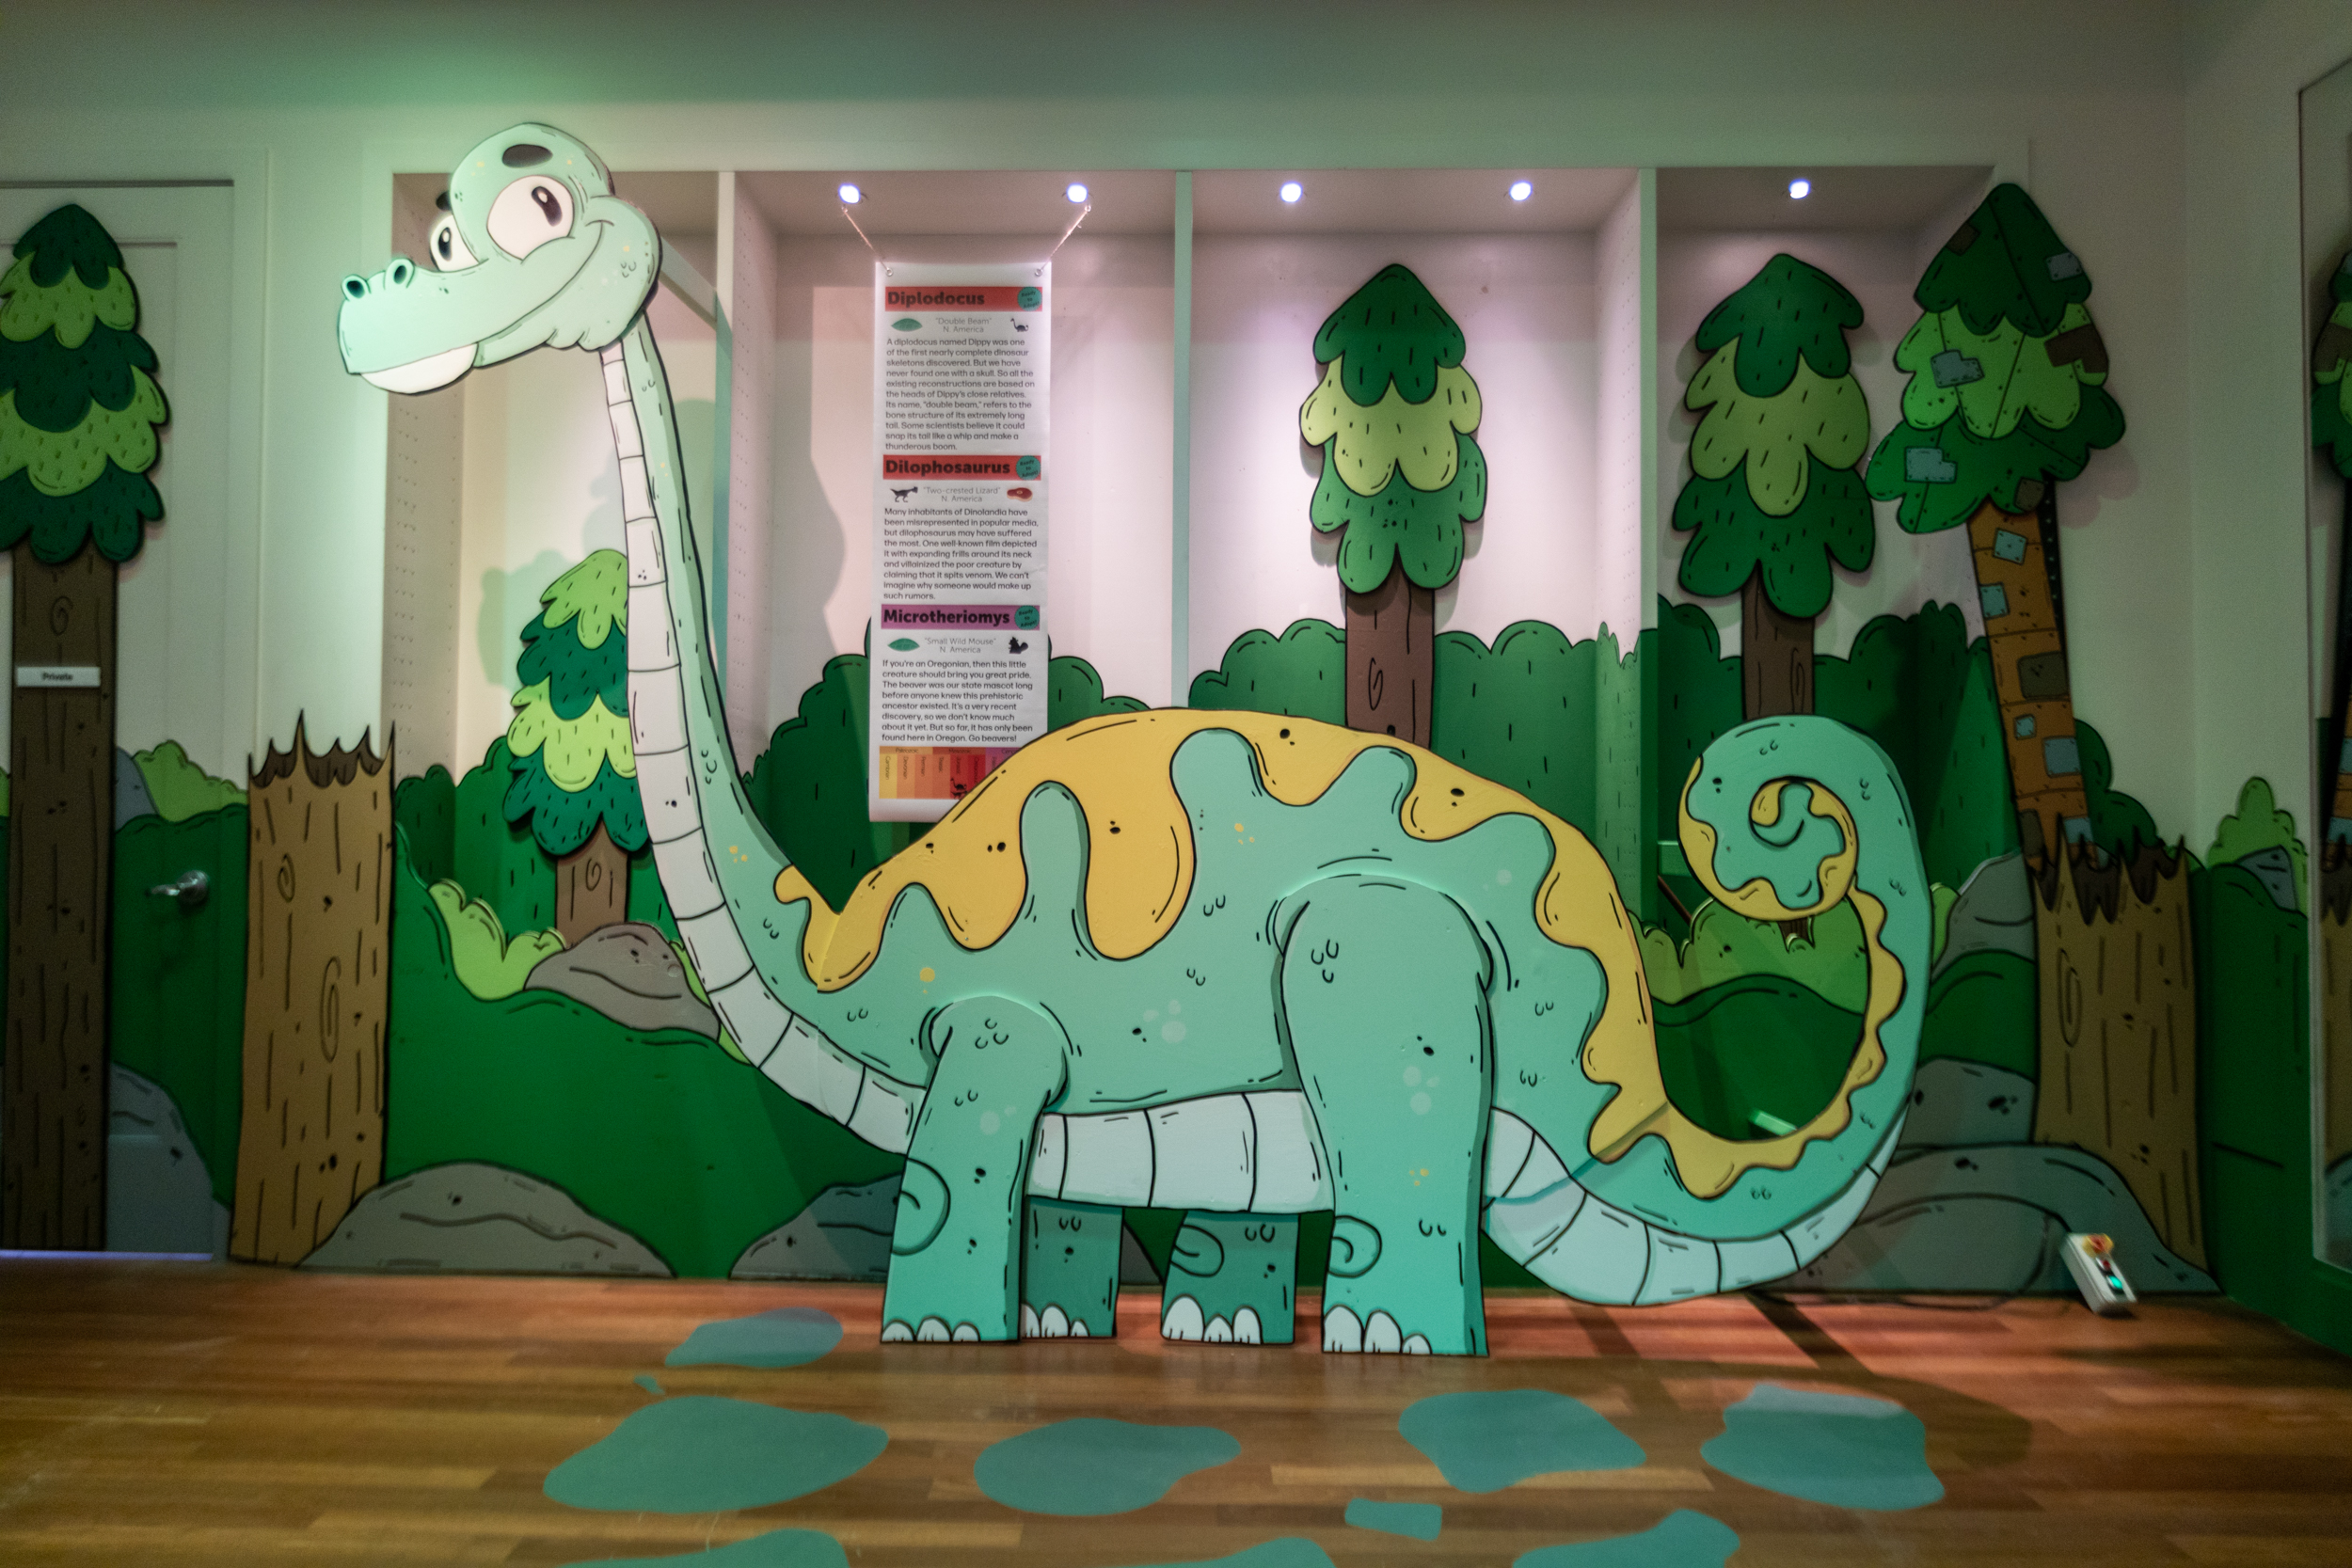 Portland artist Mike Bennett loves dinosaurs. He thinks you'll love them  too after visiting his pop-up museum, Dinolandia. - OPB